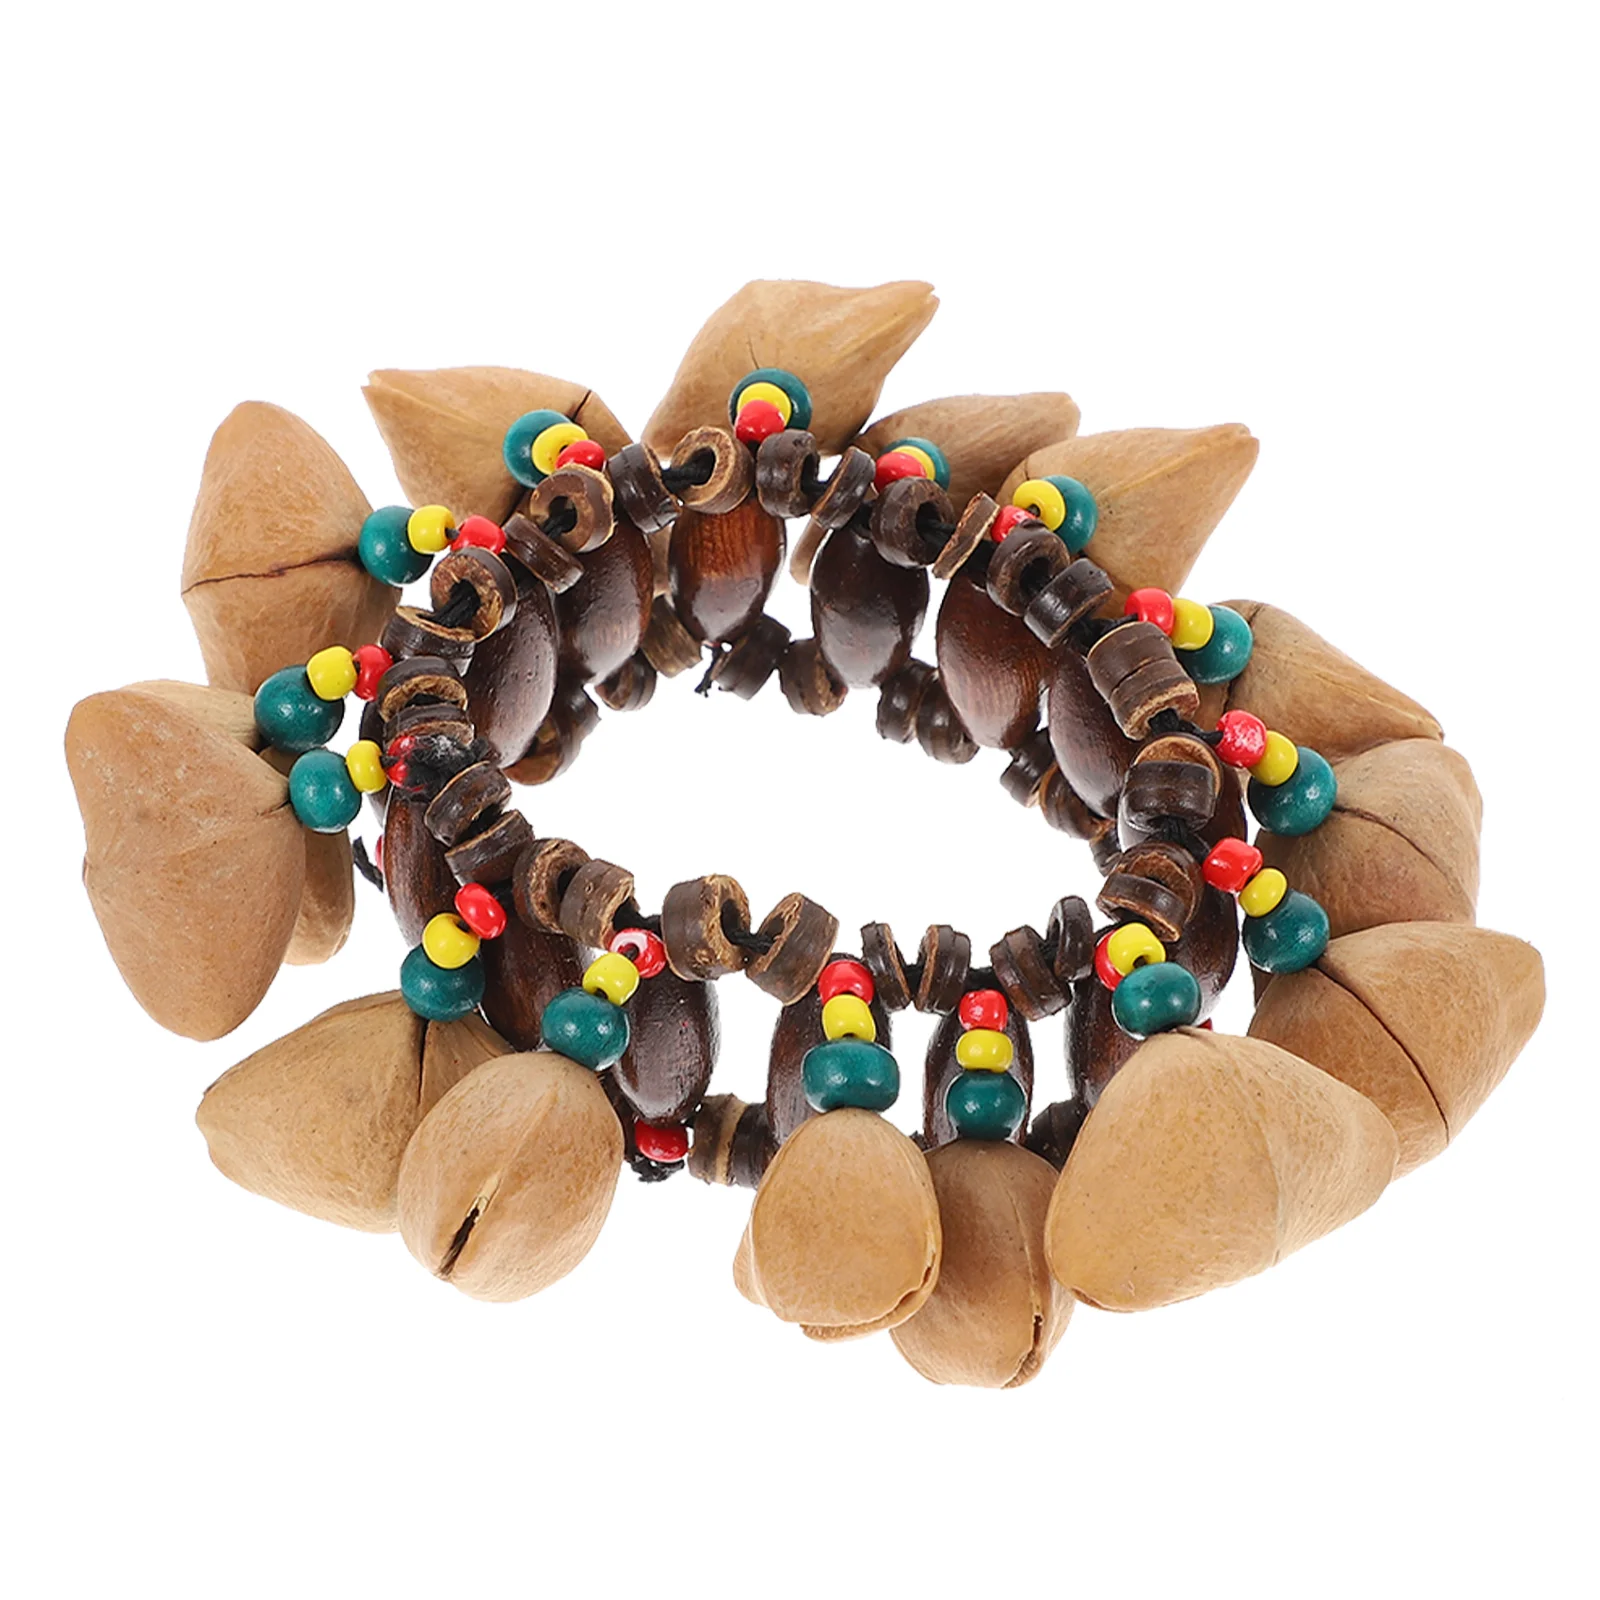 

Nut Shell Hand Bell Wooden Toy Tribal Style Bangle Wristband Husk African Ornament Dance Child Drum Djembe